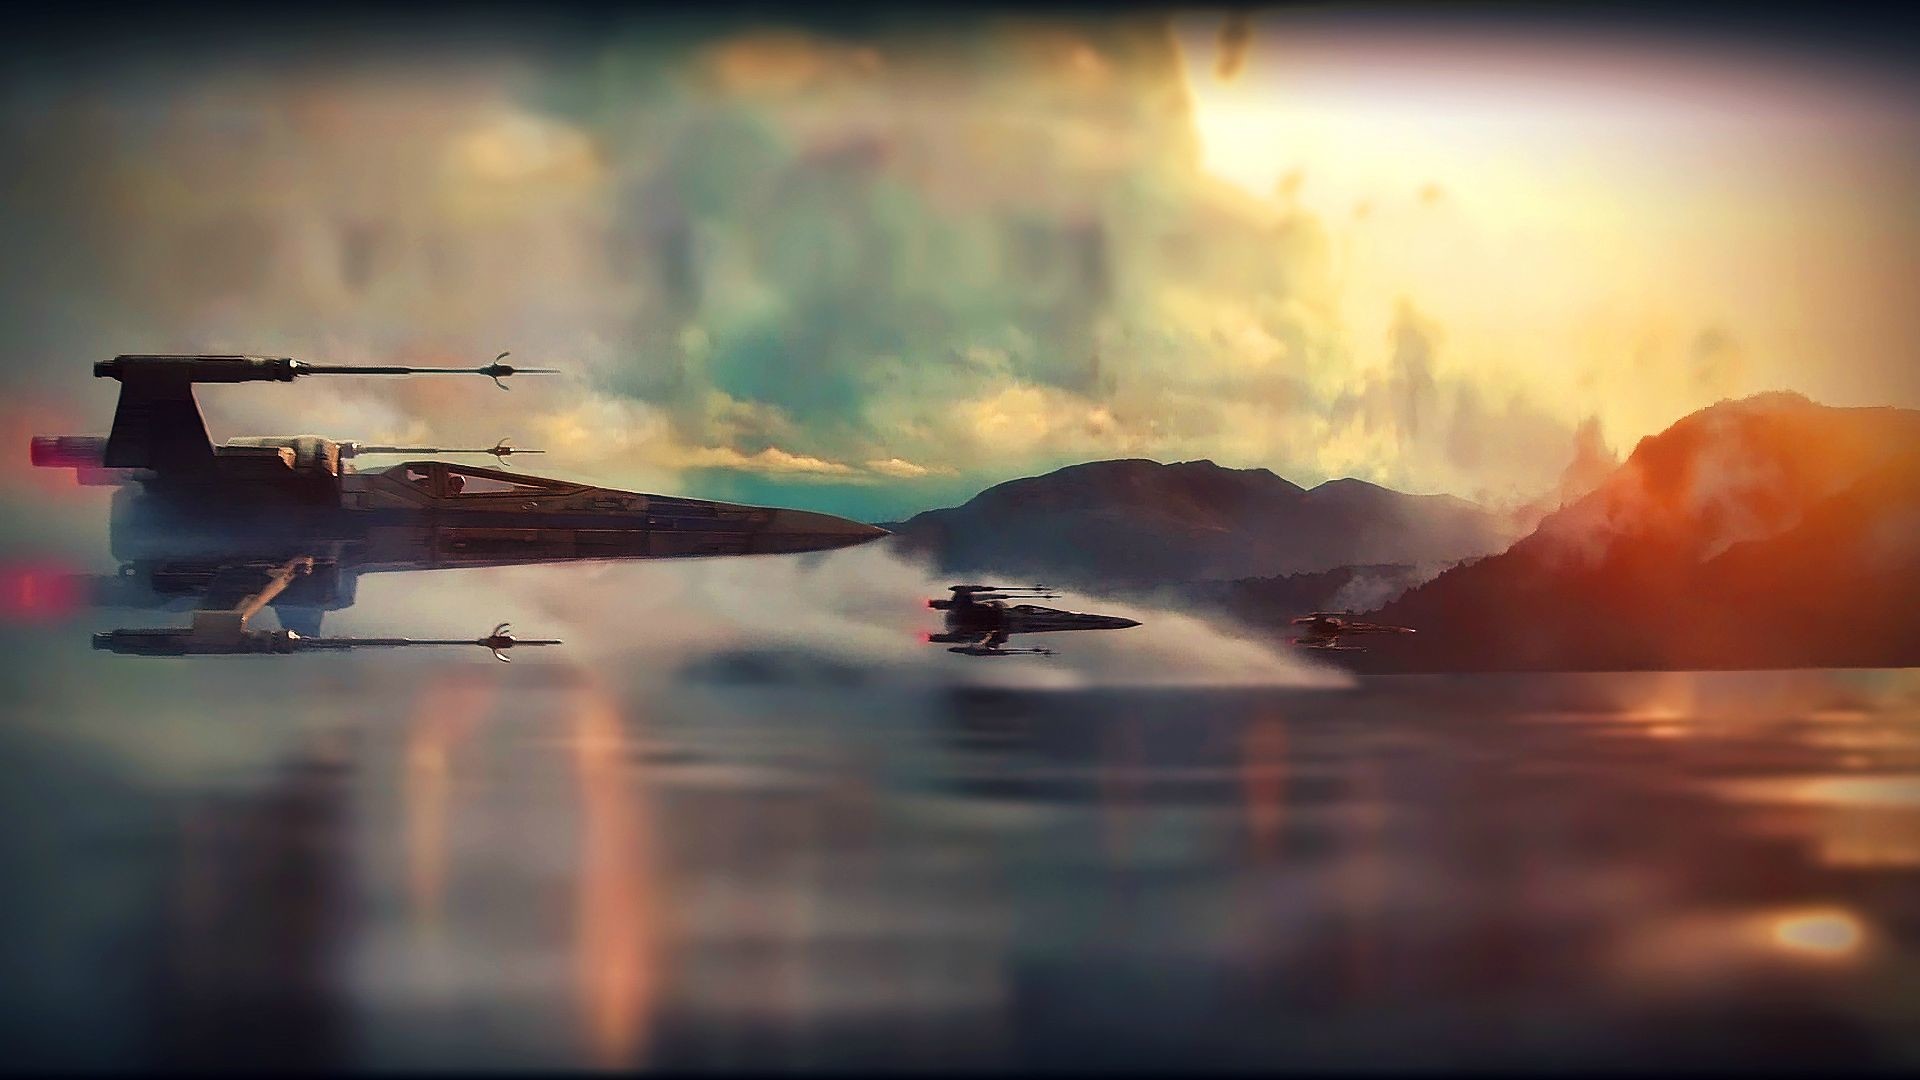 Star Wars Ep VII The Force Awakens Teaser X Wing Super Saturated / Colorful Wallpaper